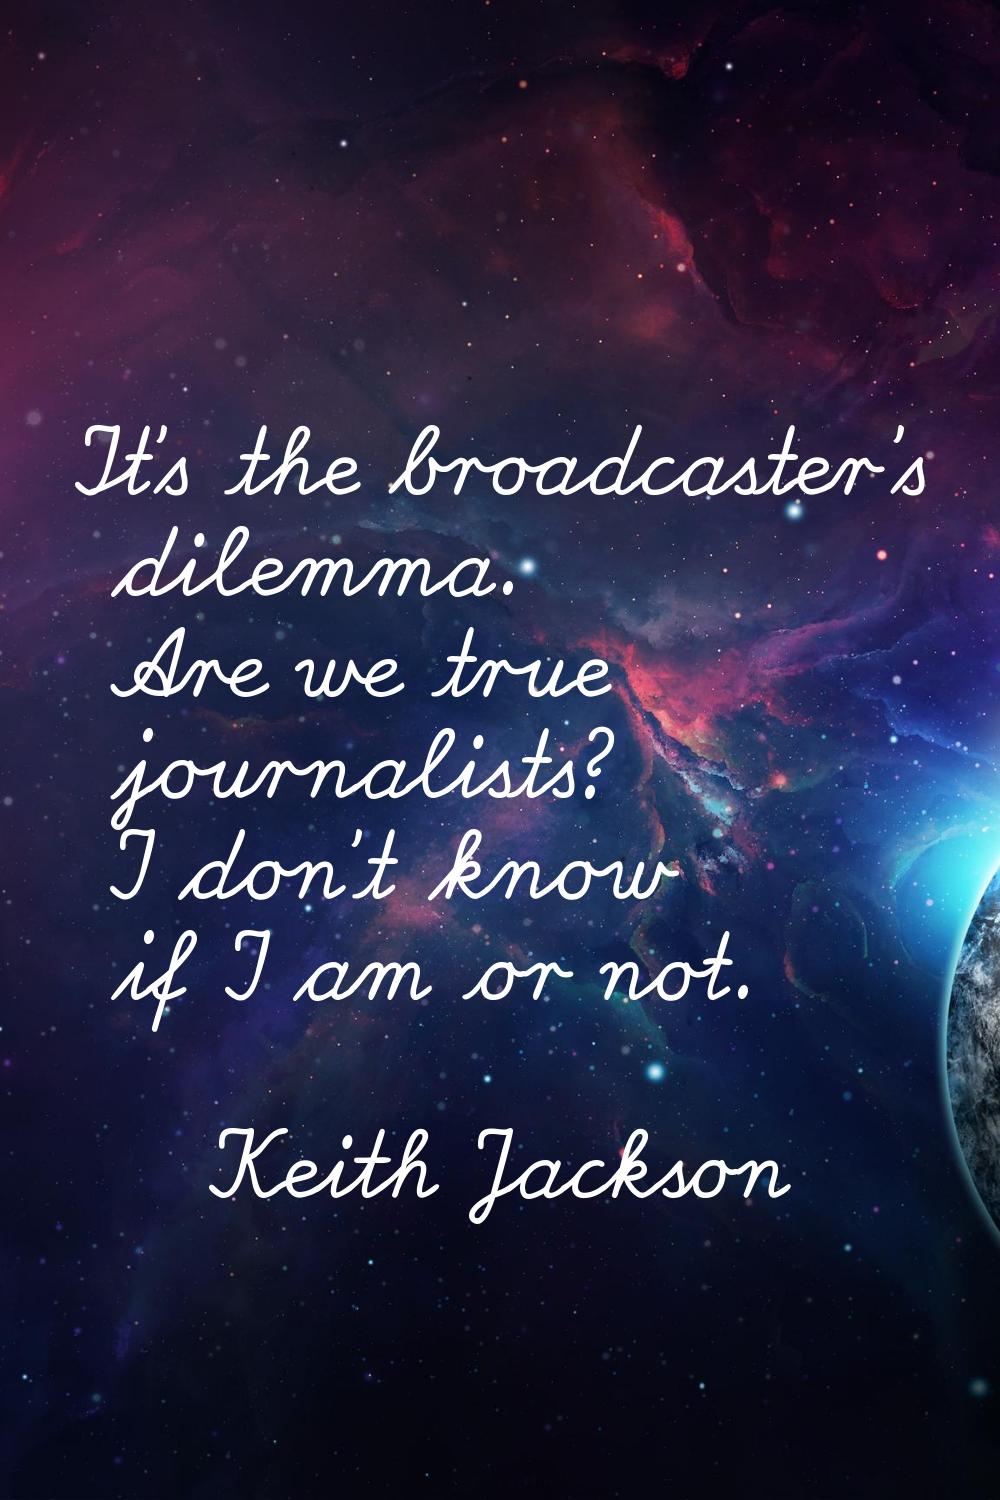 It's the broadcaster's dilemma. Are we true journalists? I don't know if I am or not.